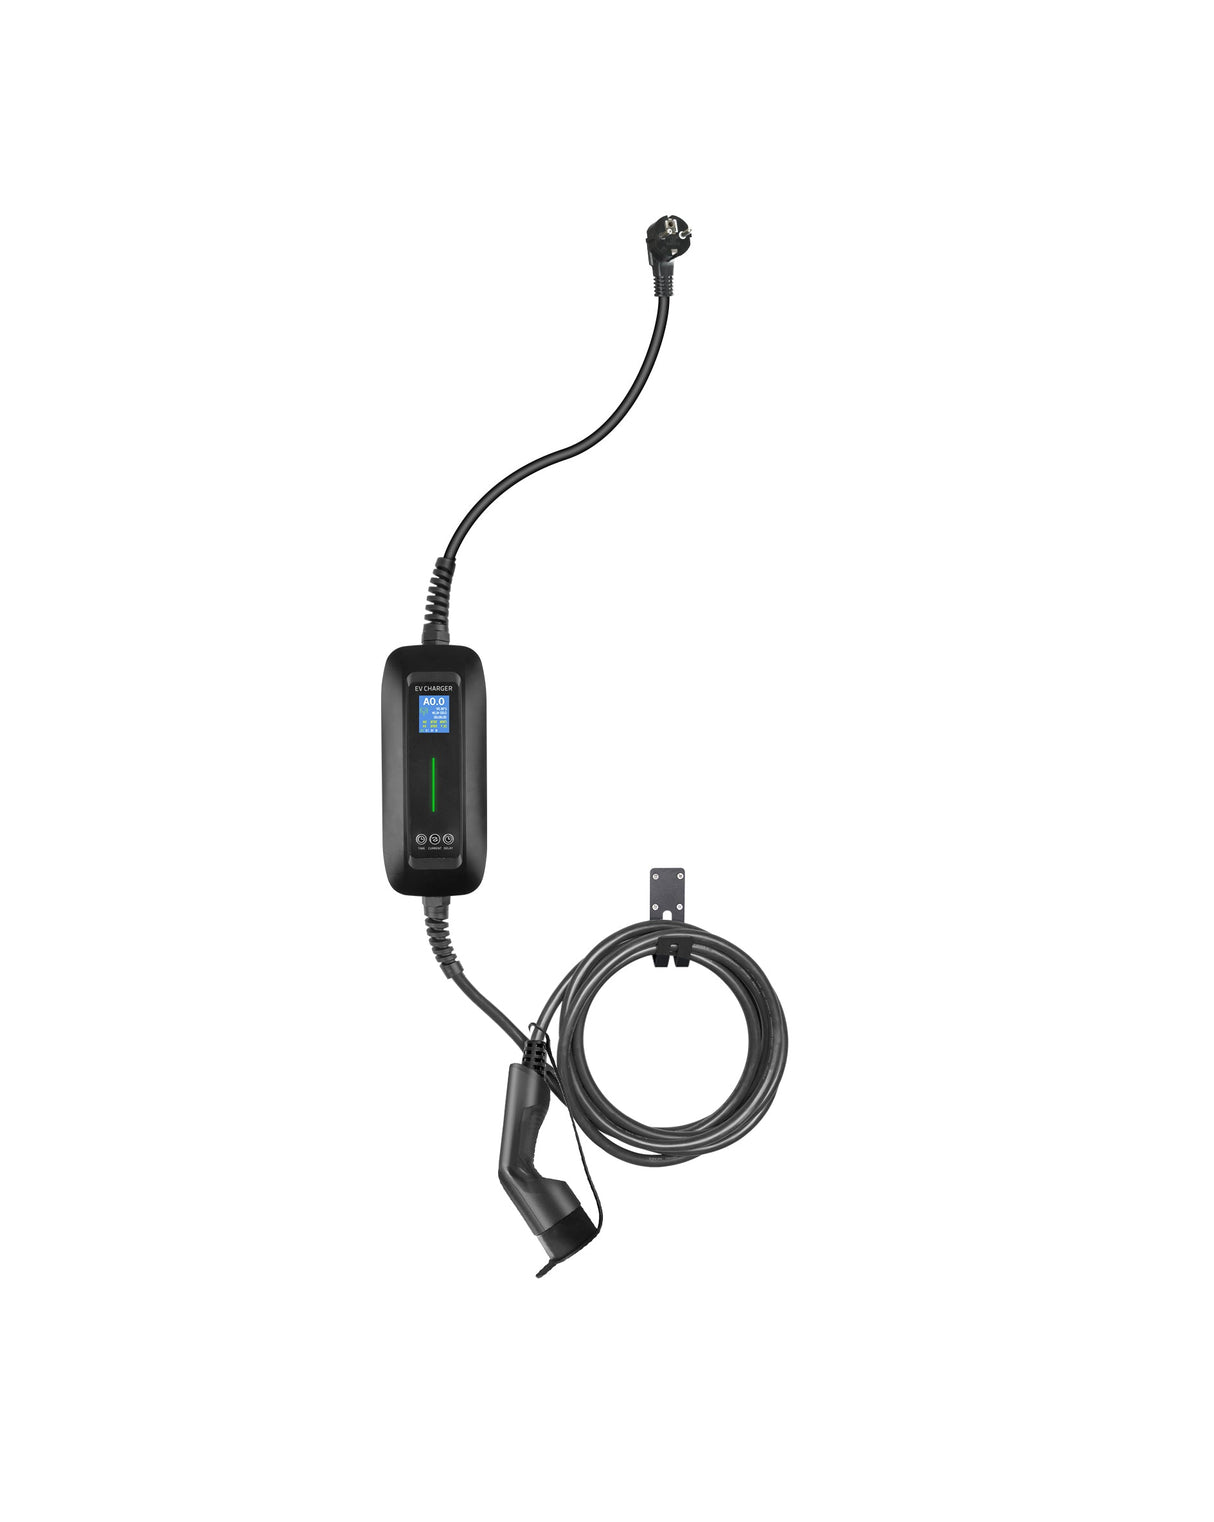 Mobile Charger Jeep Avenger - LCD Black Type 2 to Schuko - Delayed charging and Memory function